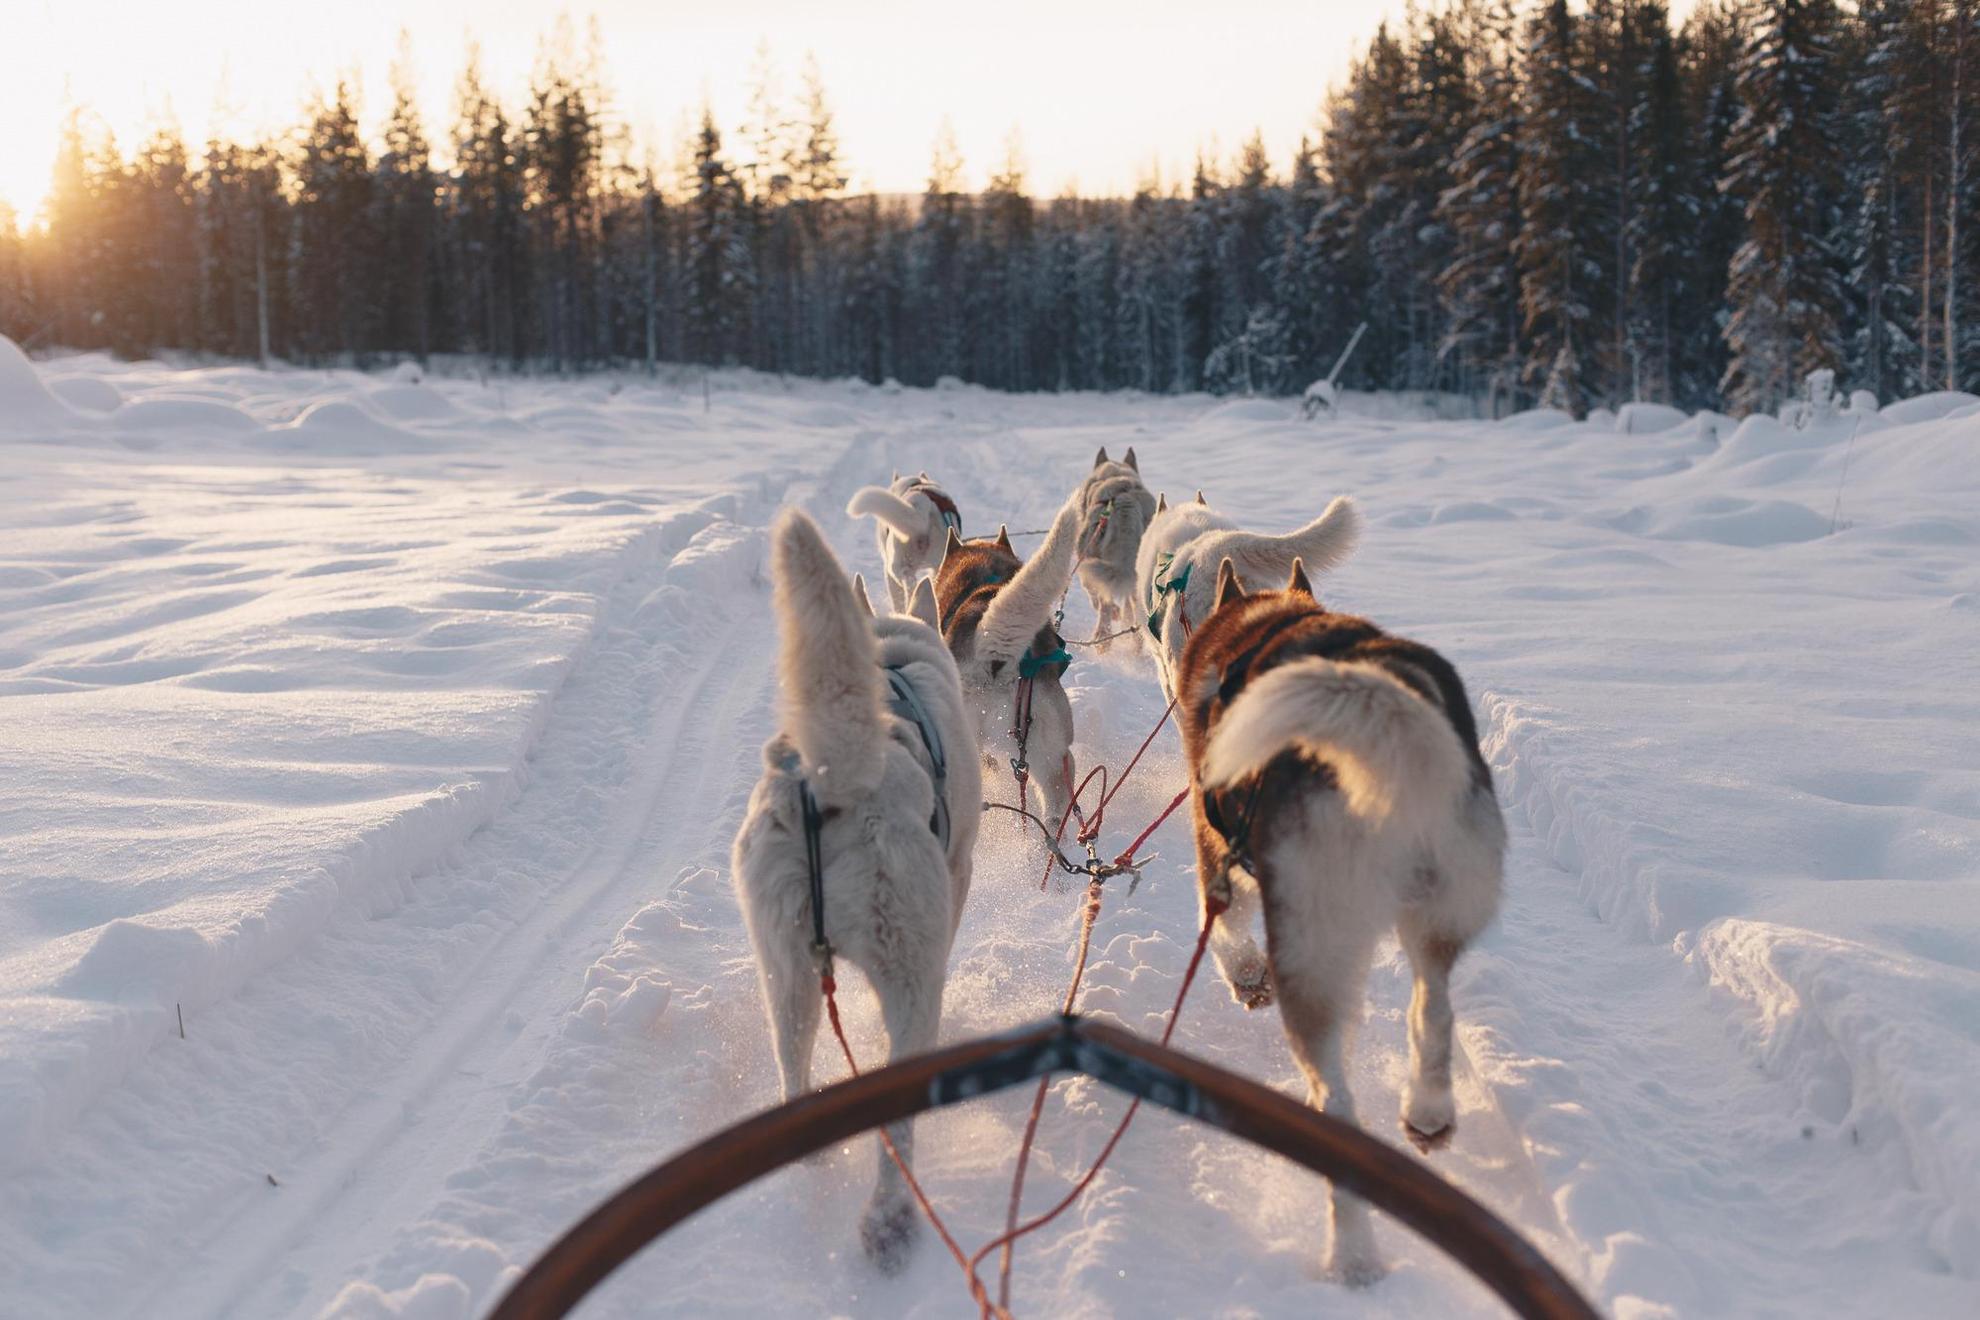 The view as a passenger on a dogsledding-ride.